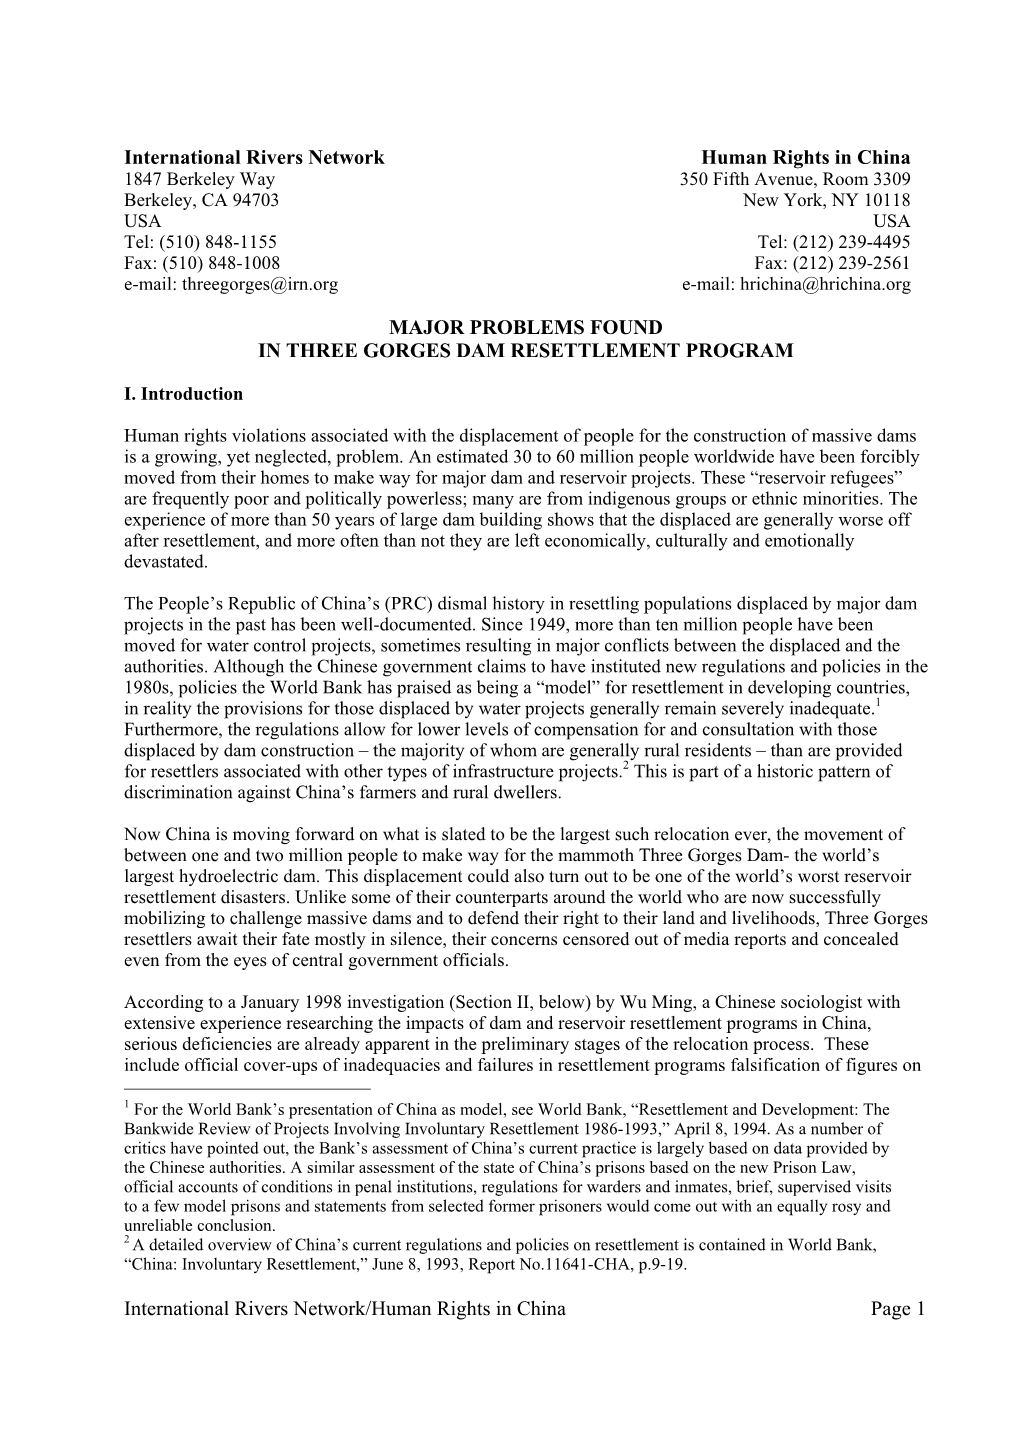 International Rivers Network/Human Rights in China Page 1